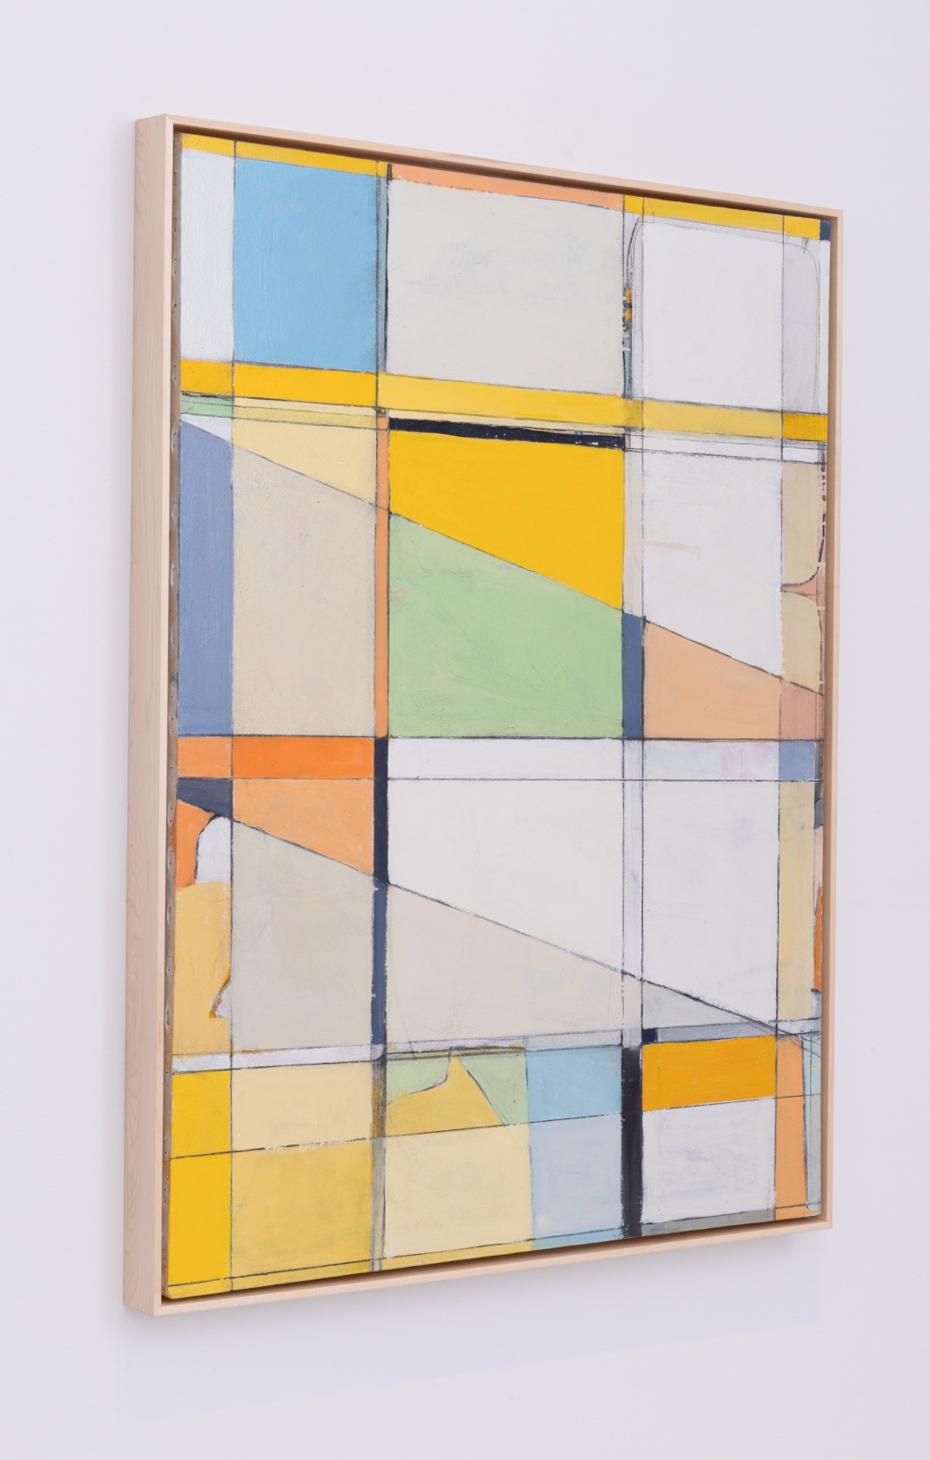 Geometric, Lyrical Abstract oil painting on canvas in bright yellow, sky blue, and white - inspired by abstract expressionist Richard Diebenkorn
